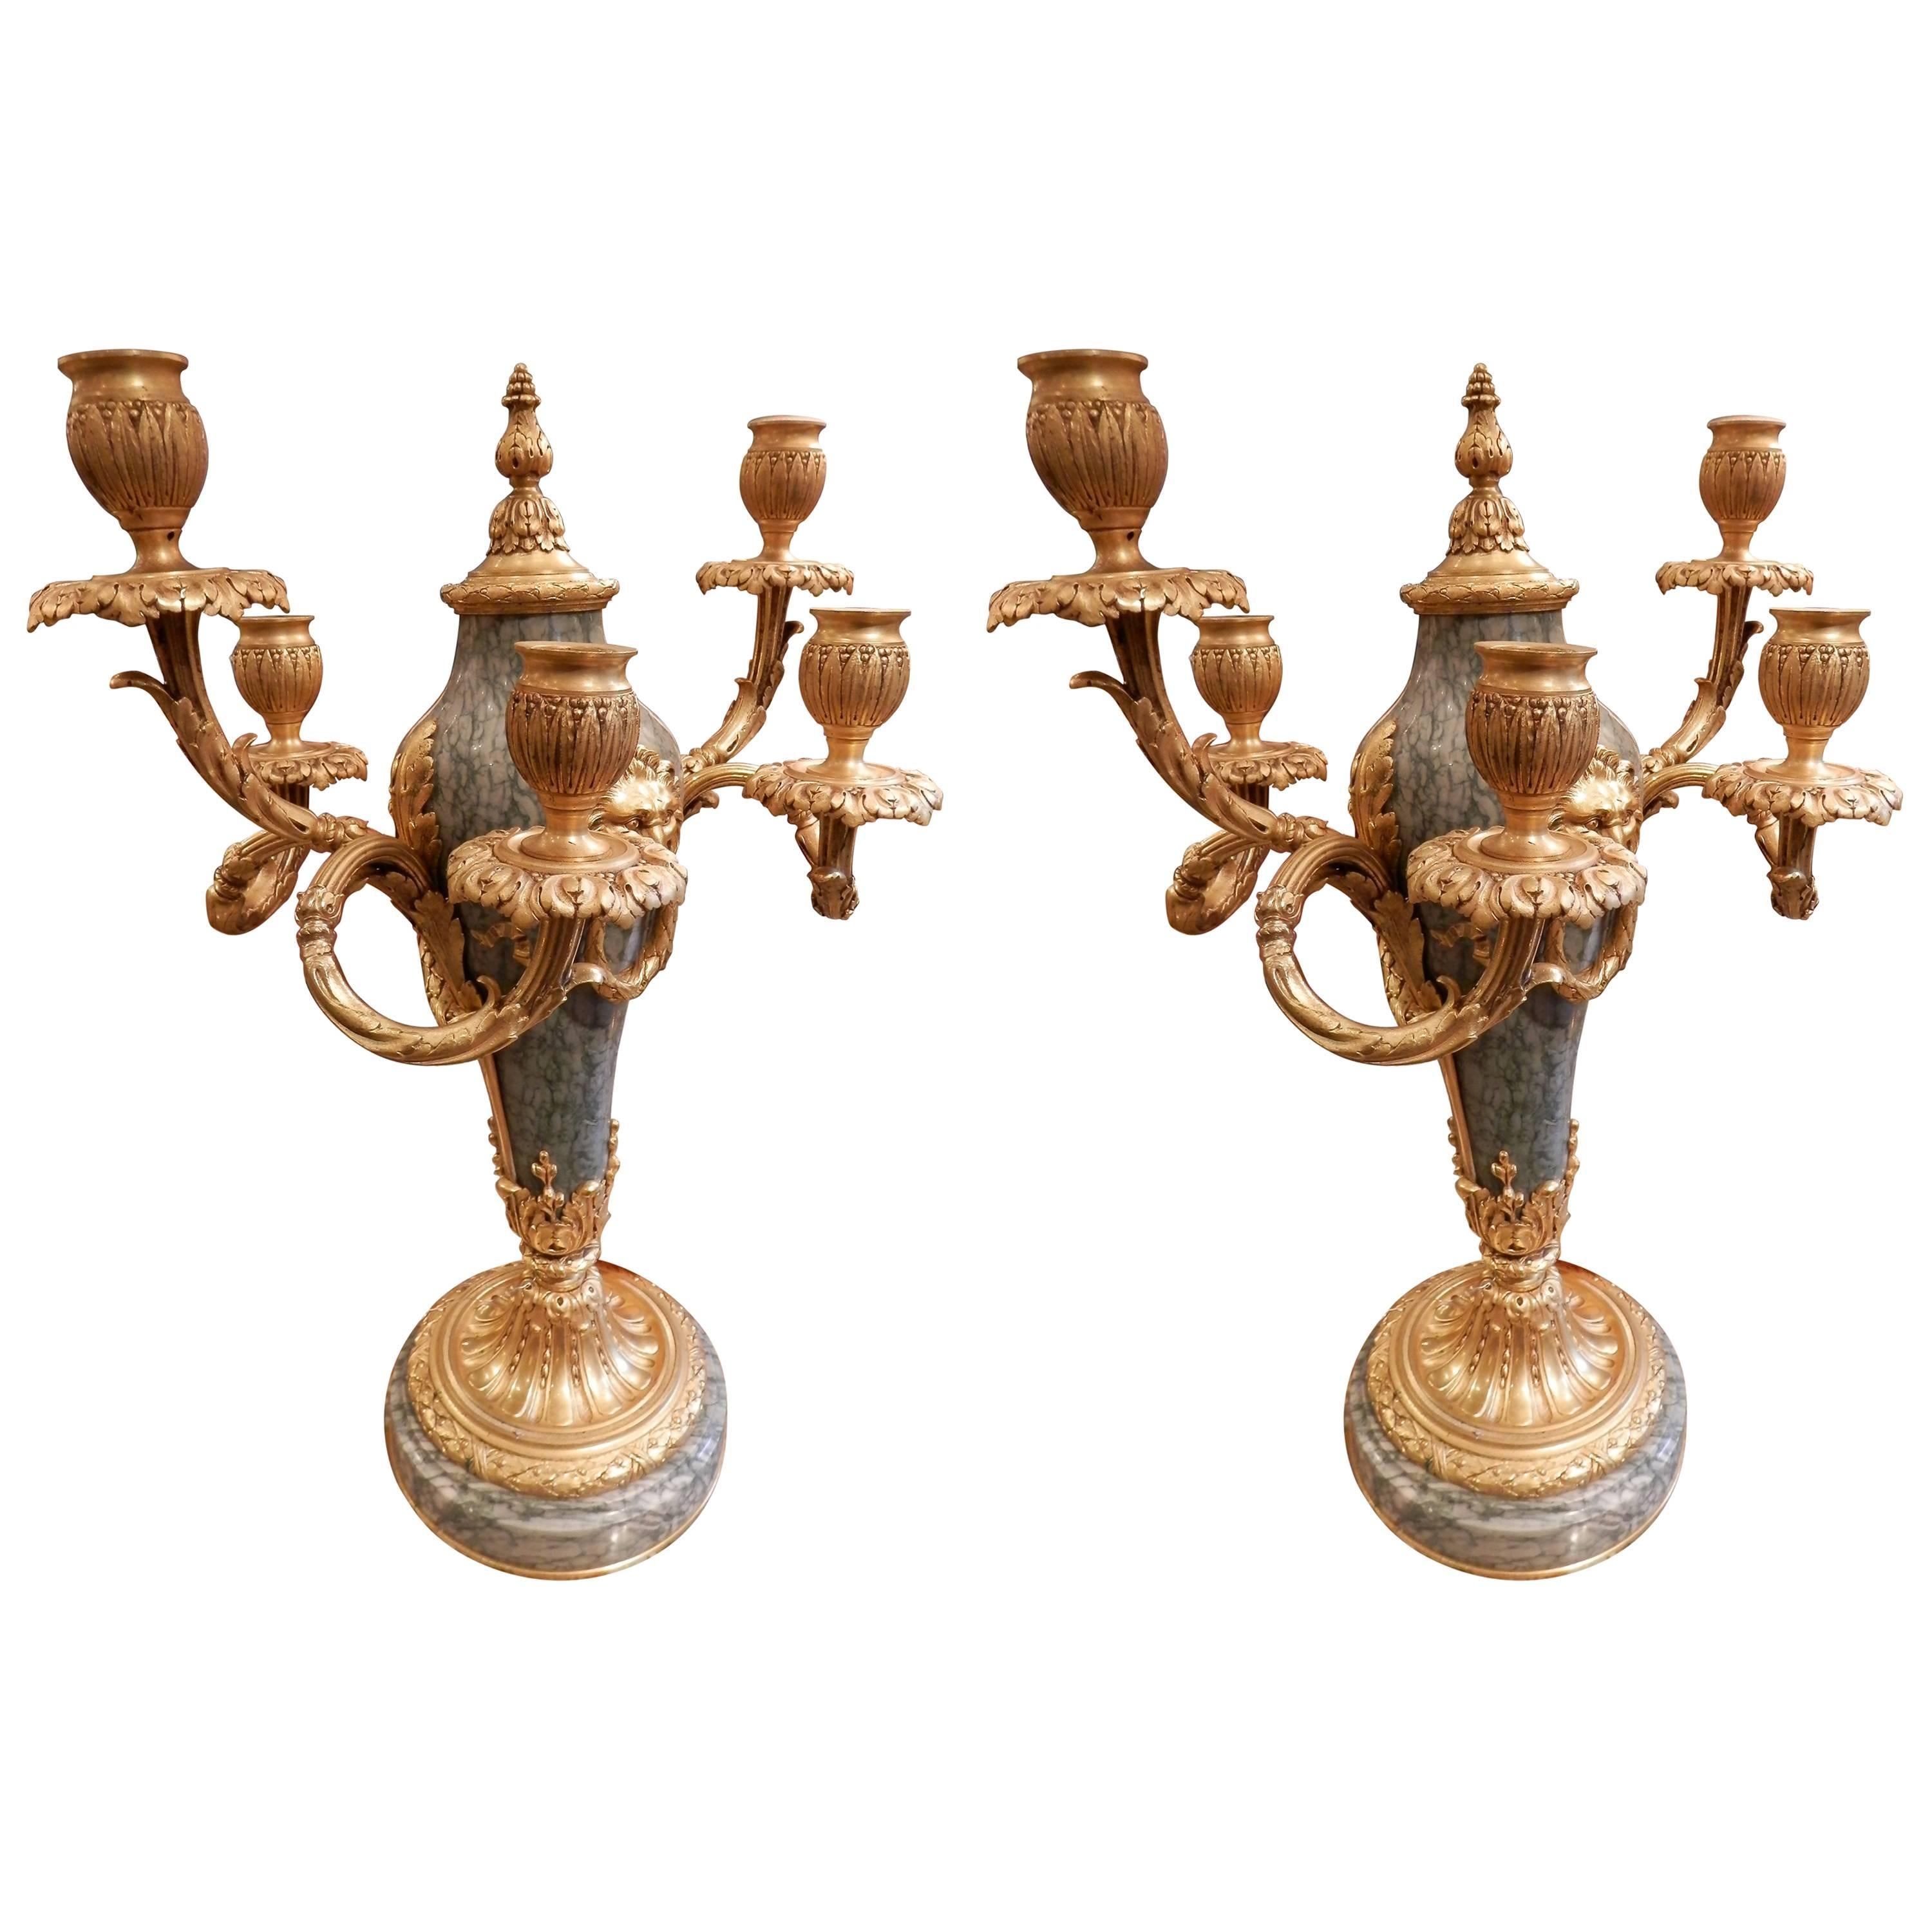 Pair of Very Fine Signed French, 19th Century Louis XVI Candelabras